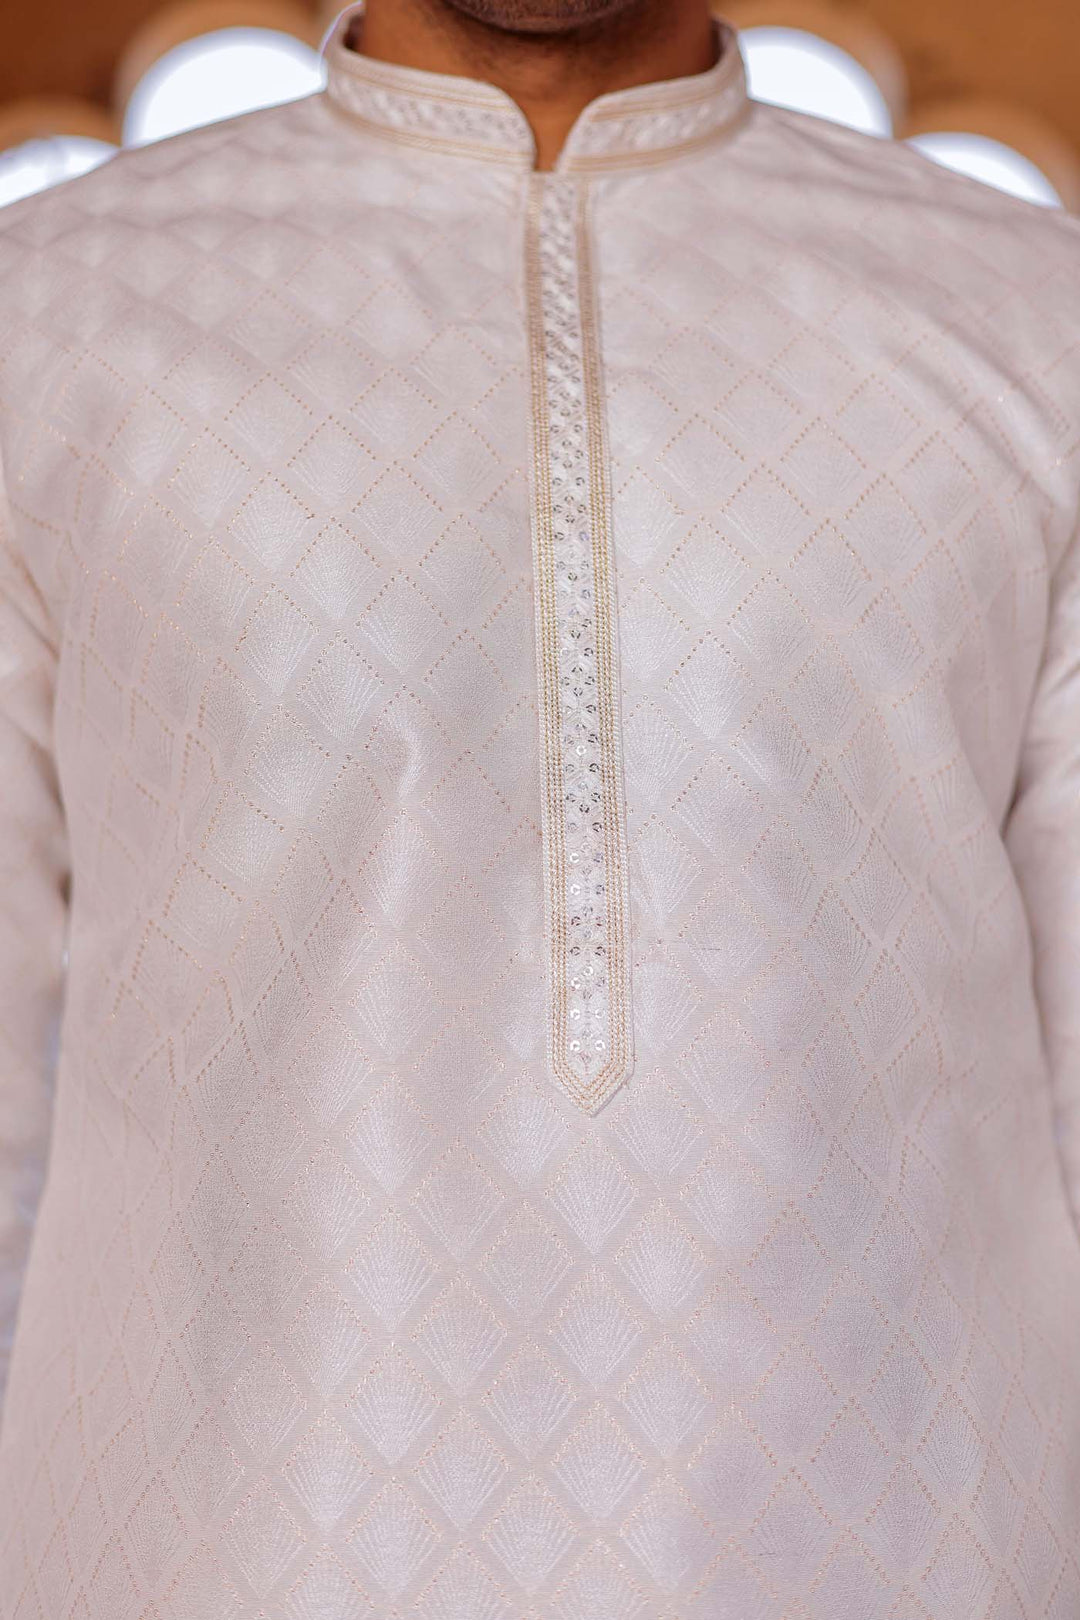 Off White Brocade Silk Kurta Suit With Sequin Thread Embroidery.